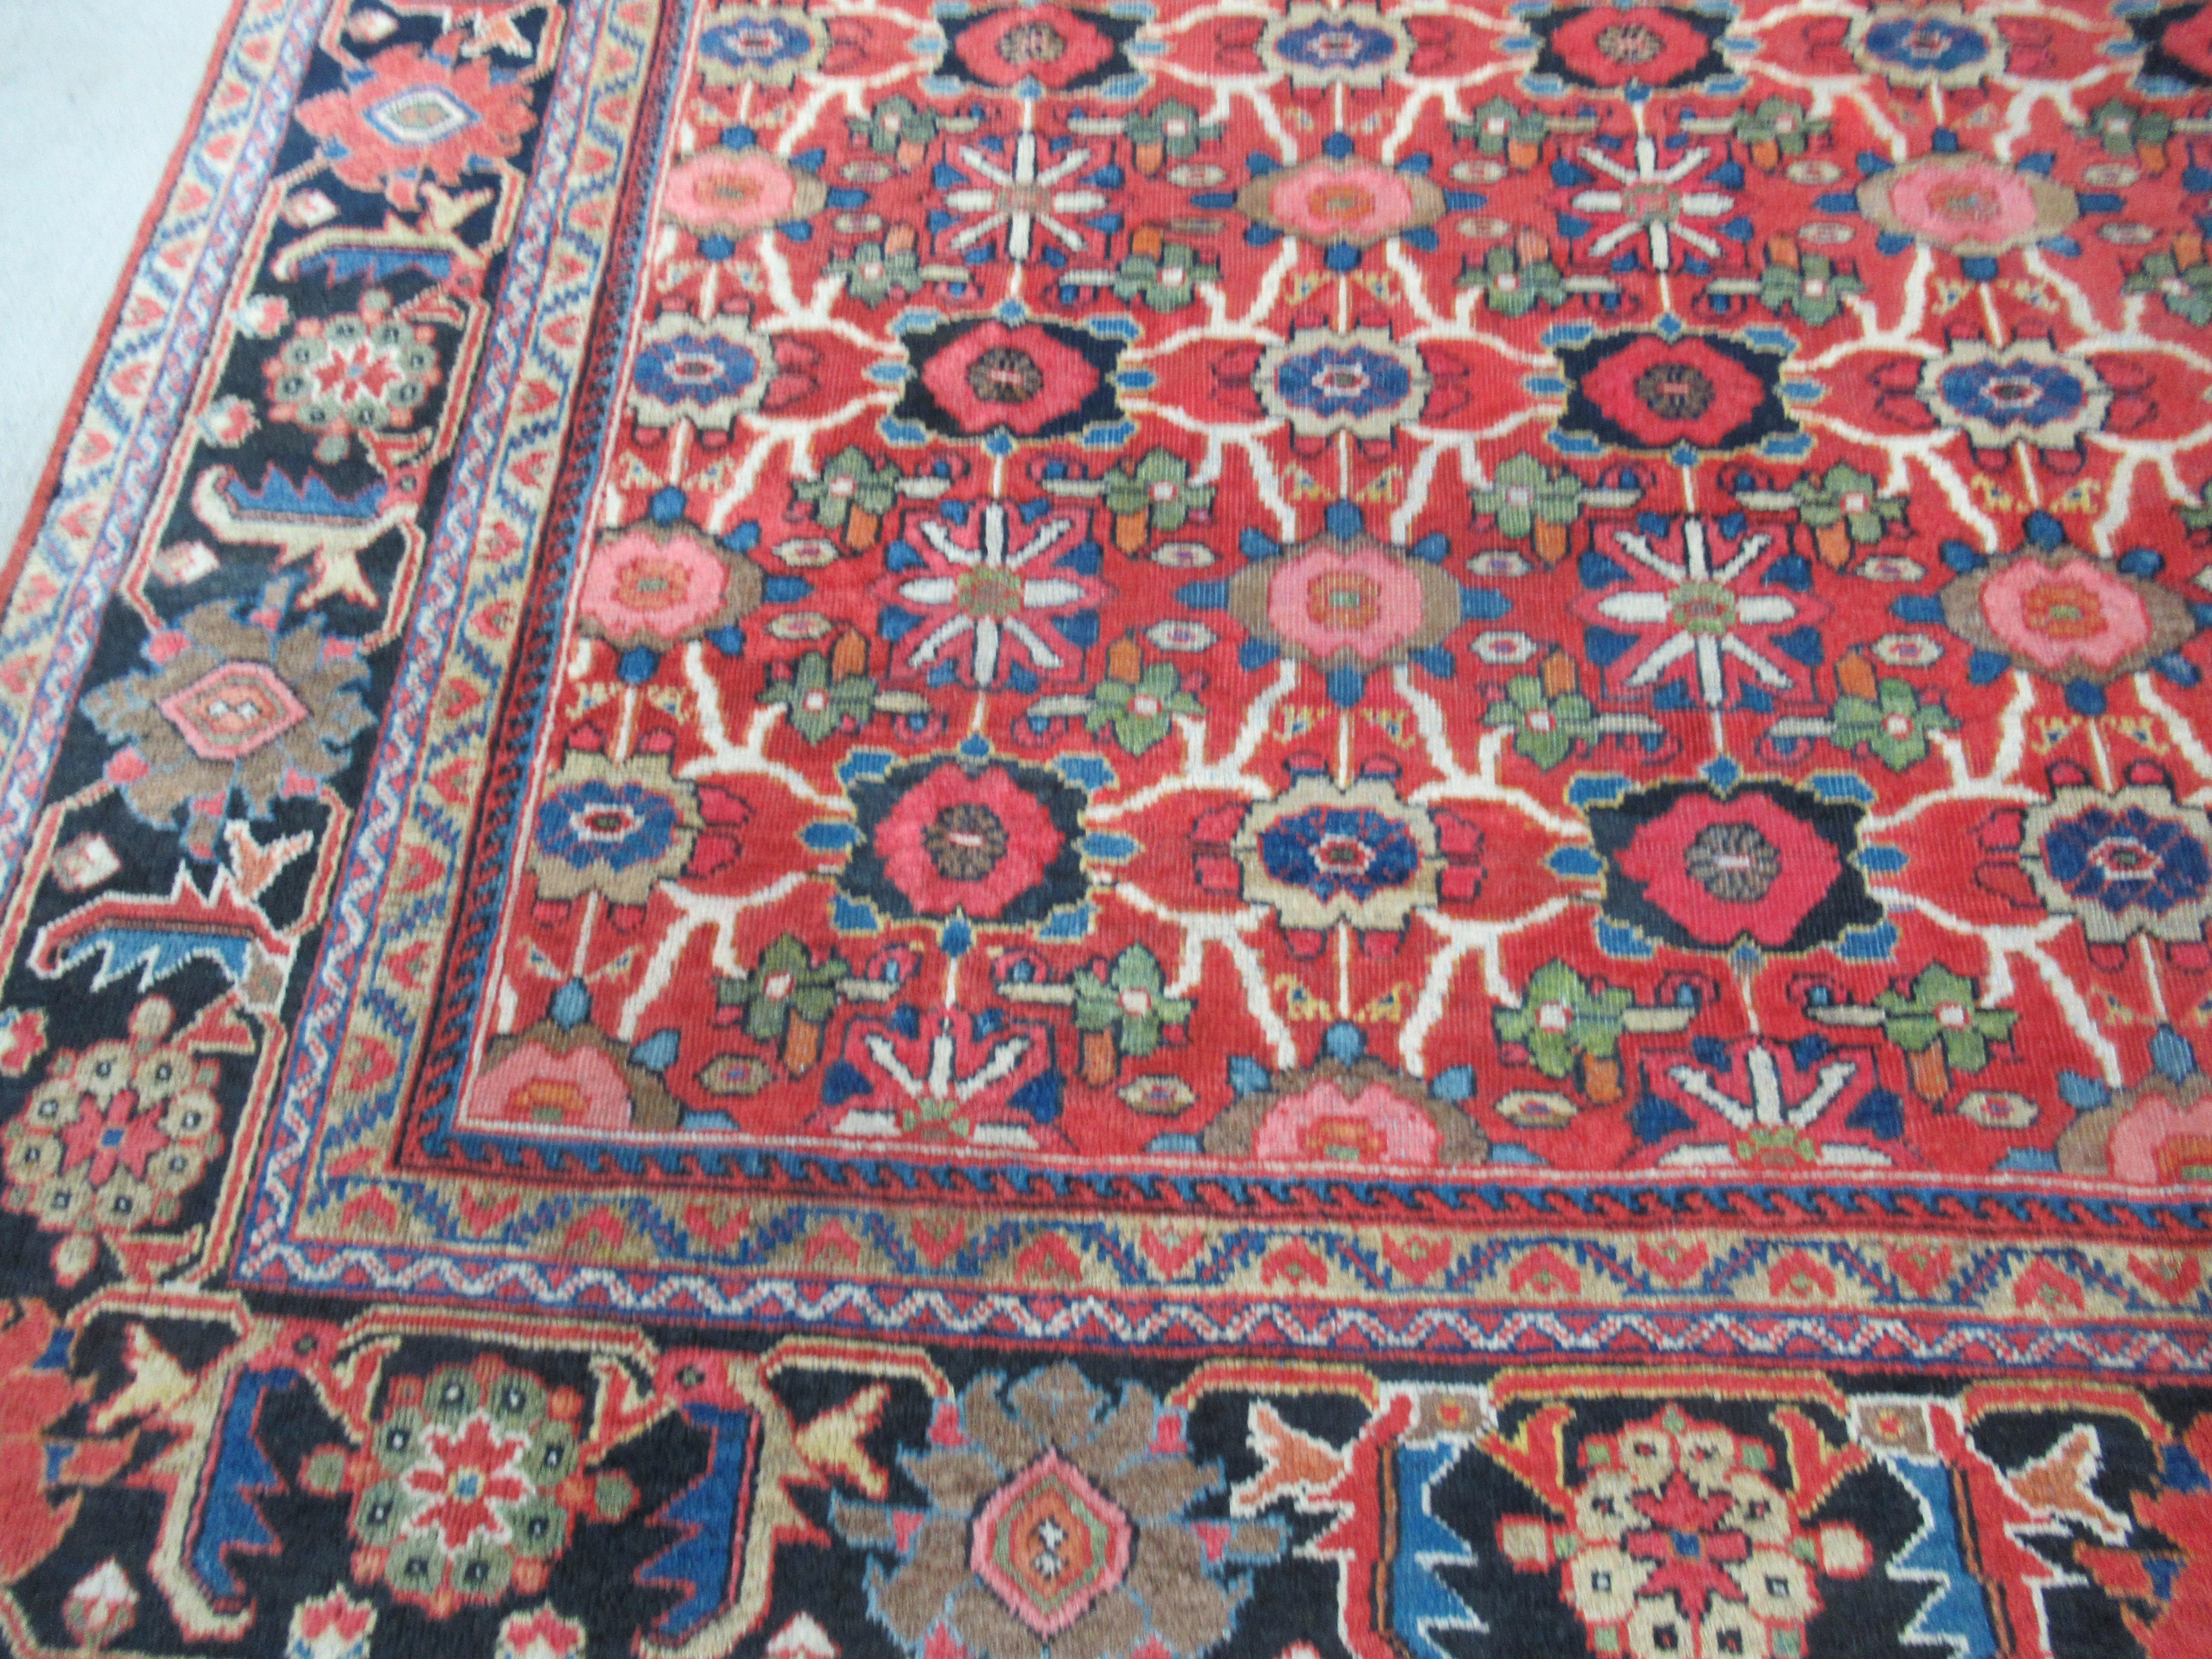 Antique Mahal carpet of large size, with all over mina khani (many flowers) design.

This outstanding large size Mahal carpet has an all over floral design on a soft red ground. The carpet is framed with a bold border on a dark indigo blue